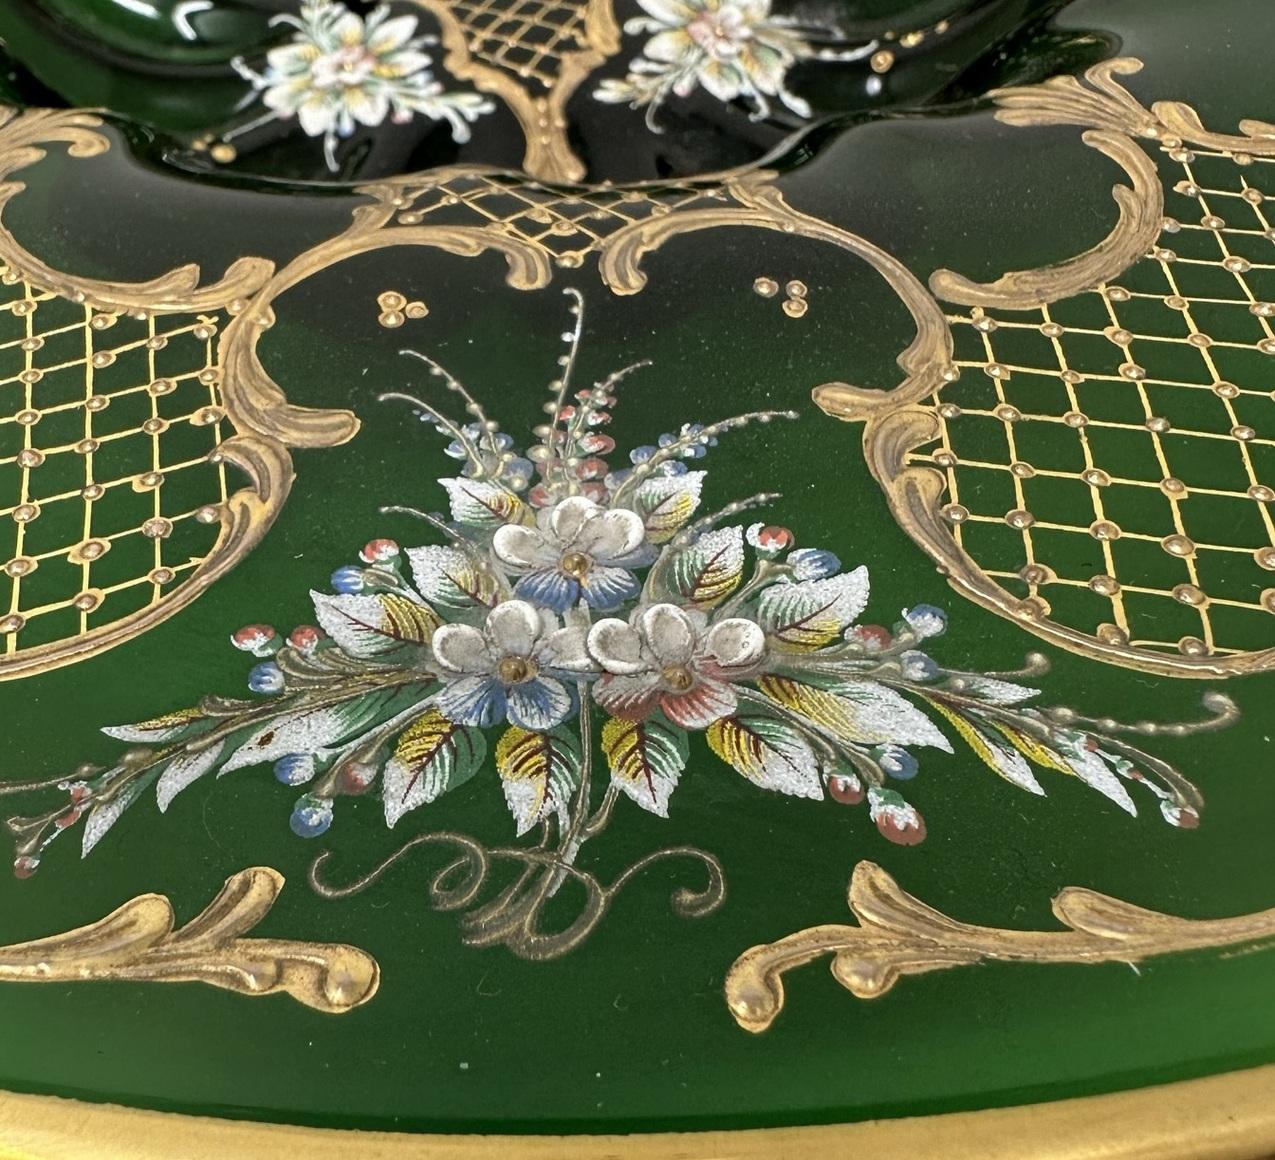 Polished Antique Vintage Moser Bohemian Emerald Green Enameled and Gilt Glass Centerpiece